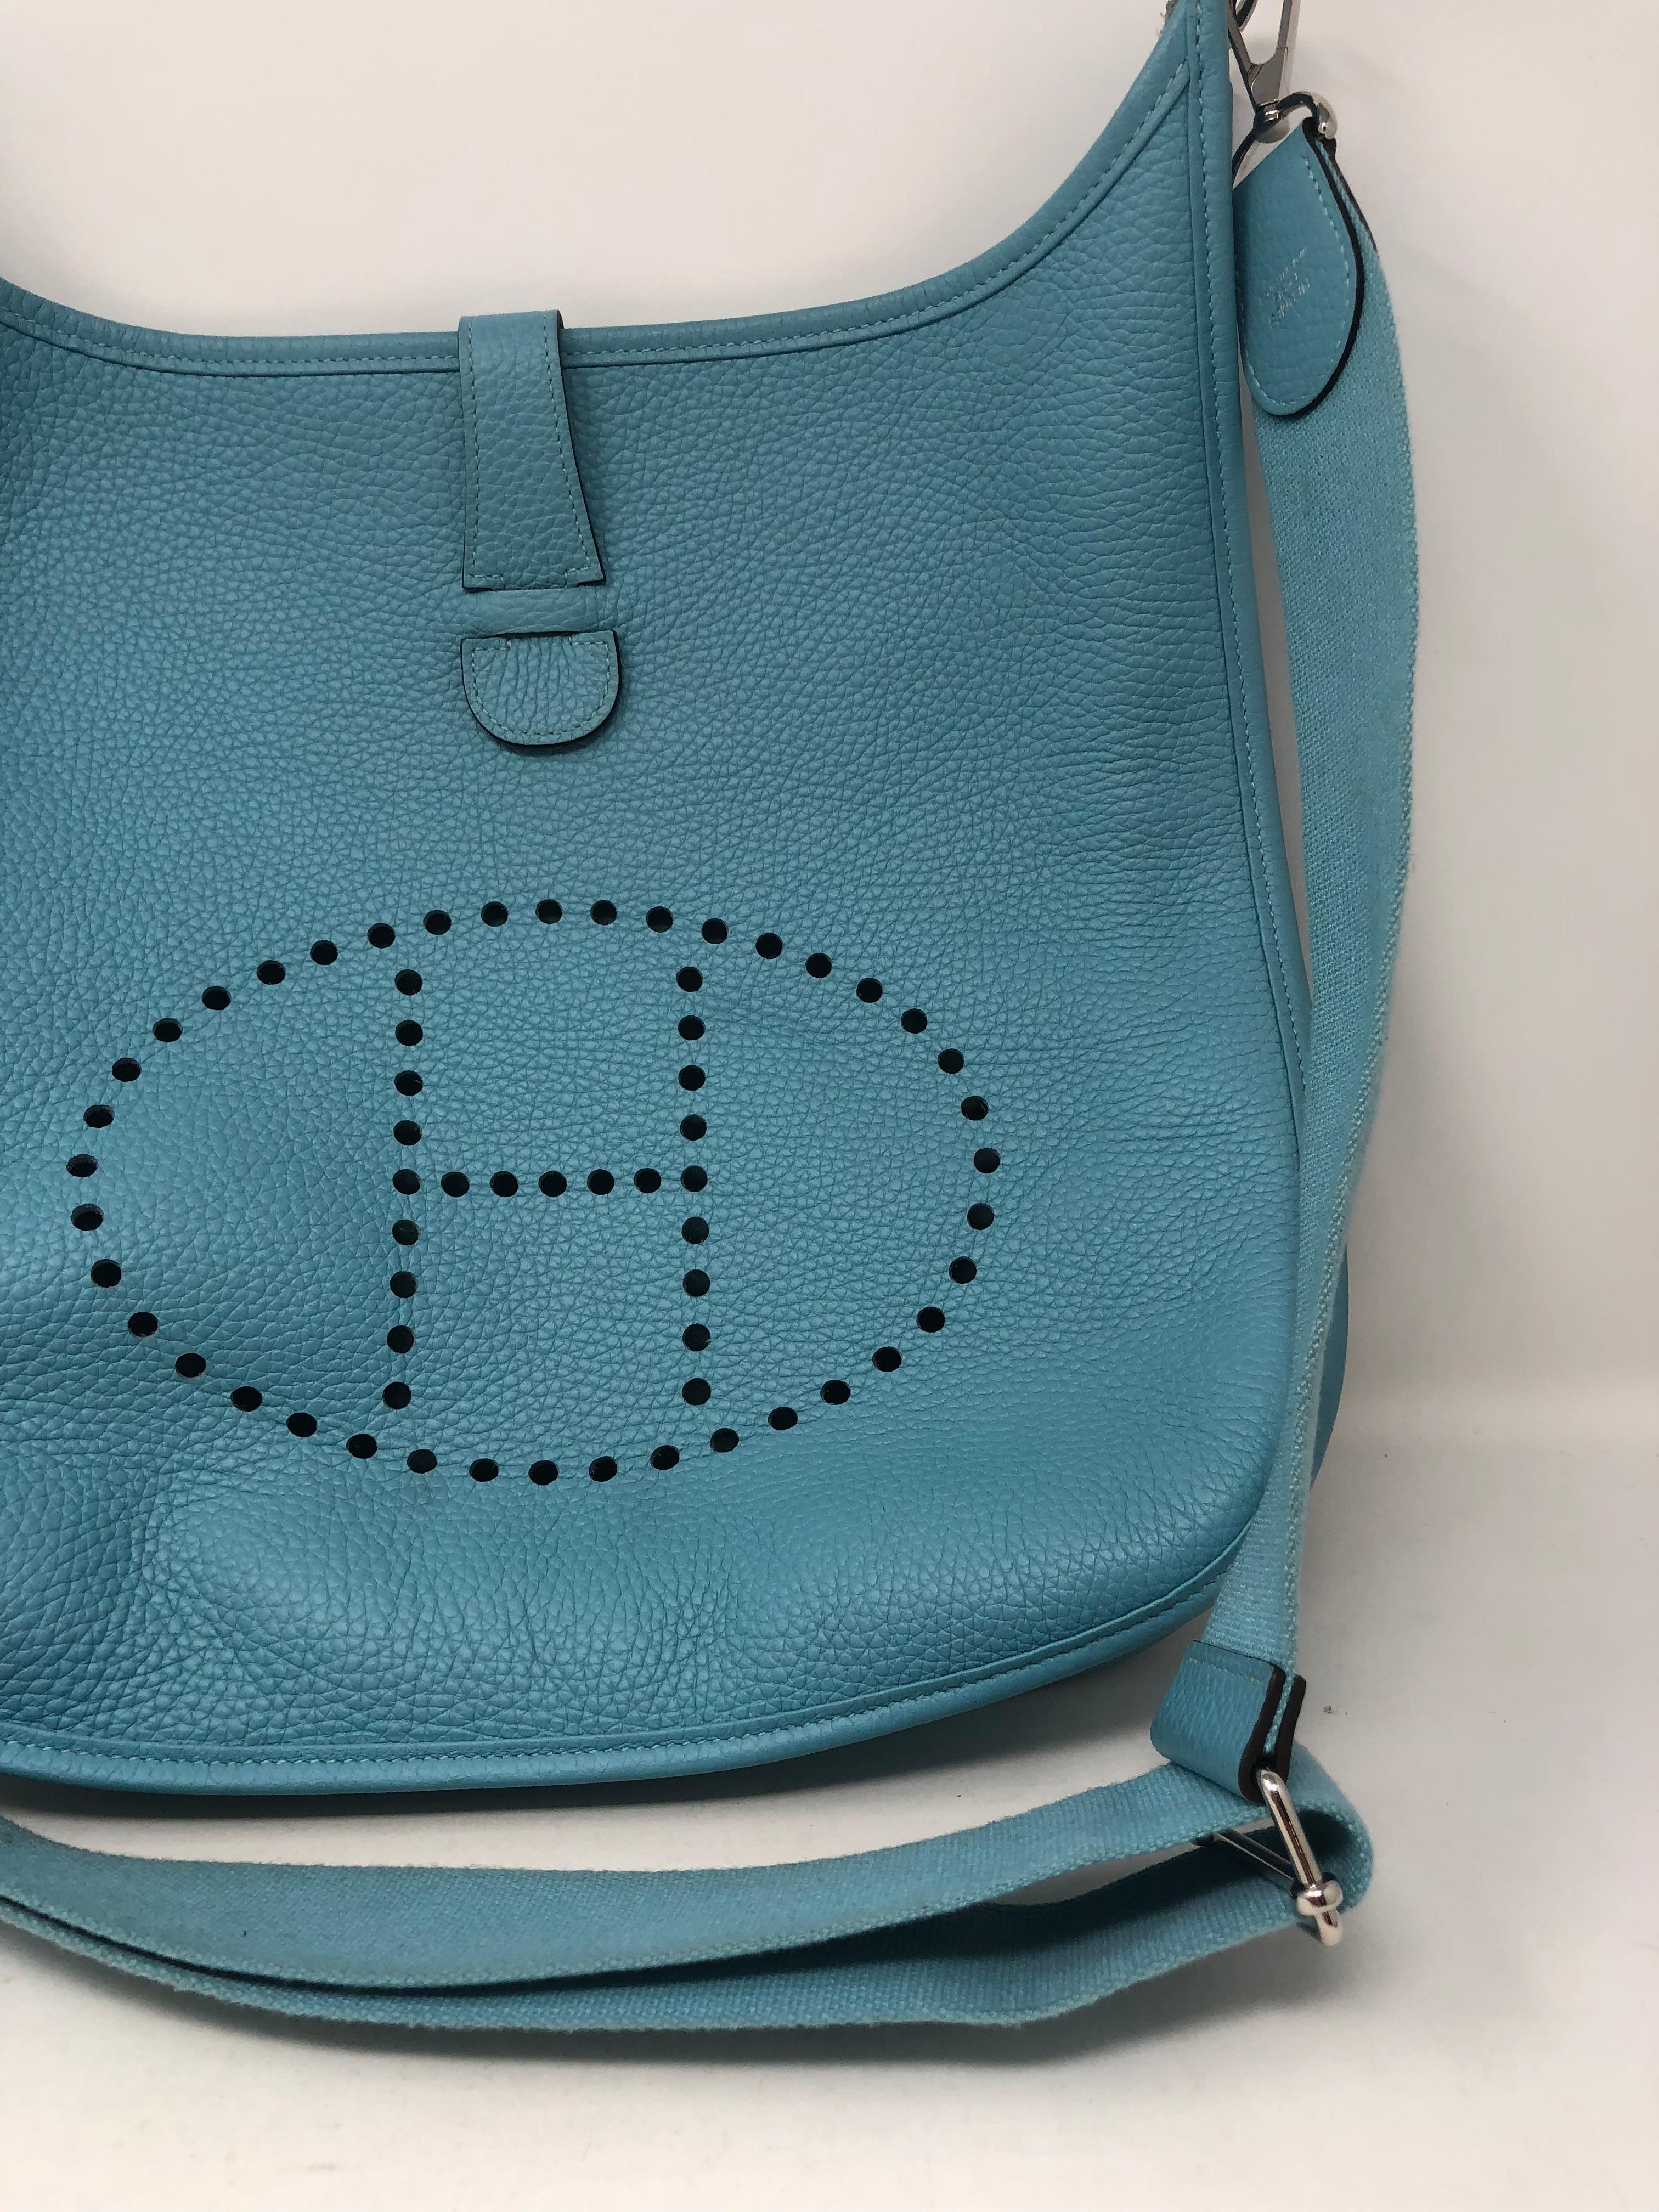 Hermes Teal Evelyne GM Crossbody Bag. Series 3 model with adjustable strap. Good condition. Light wear. Palladium hardware in beautiful teal, aqua color. Guaranteed authentic. 